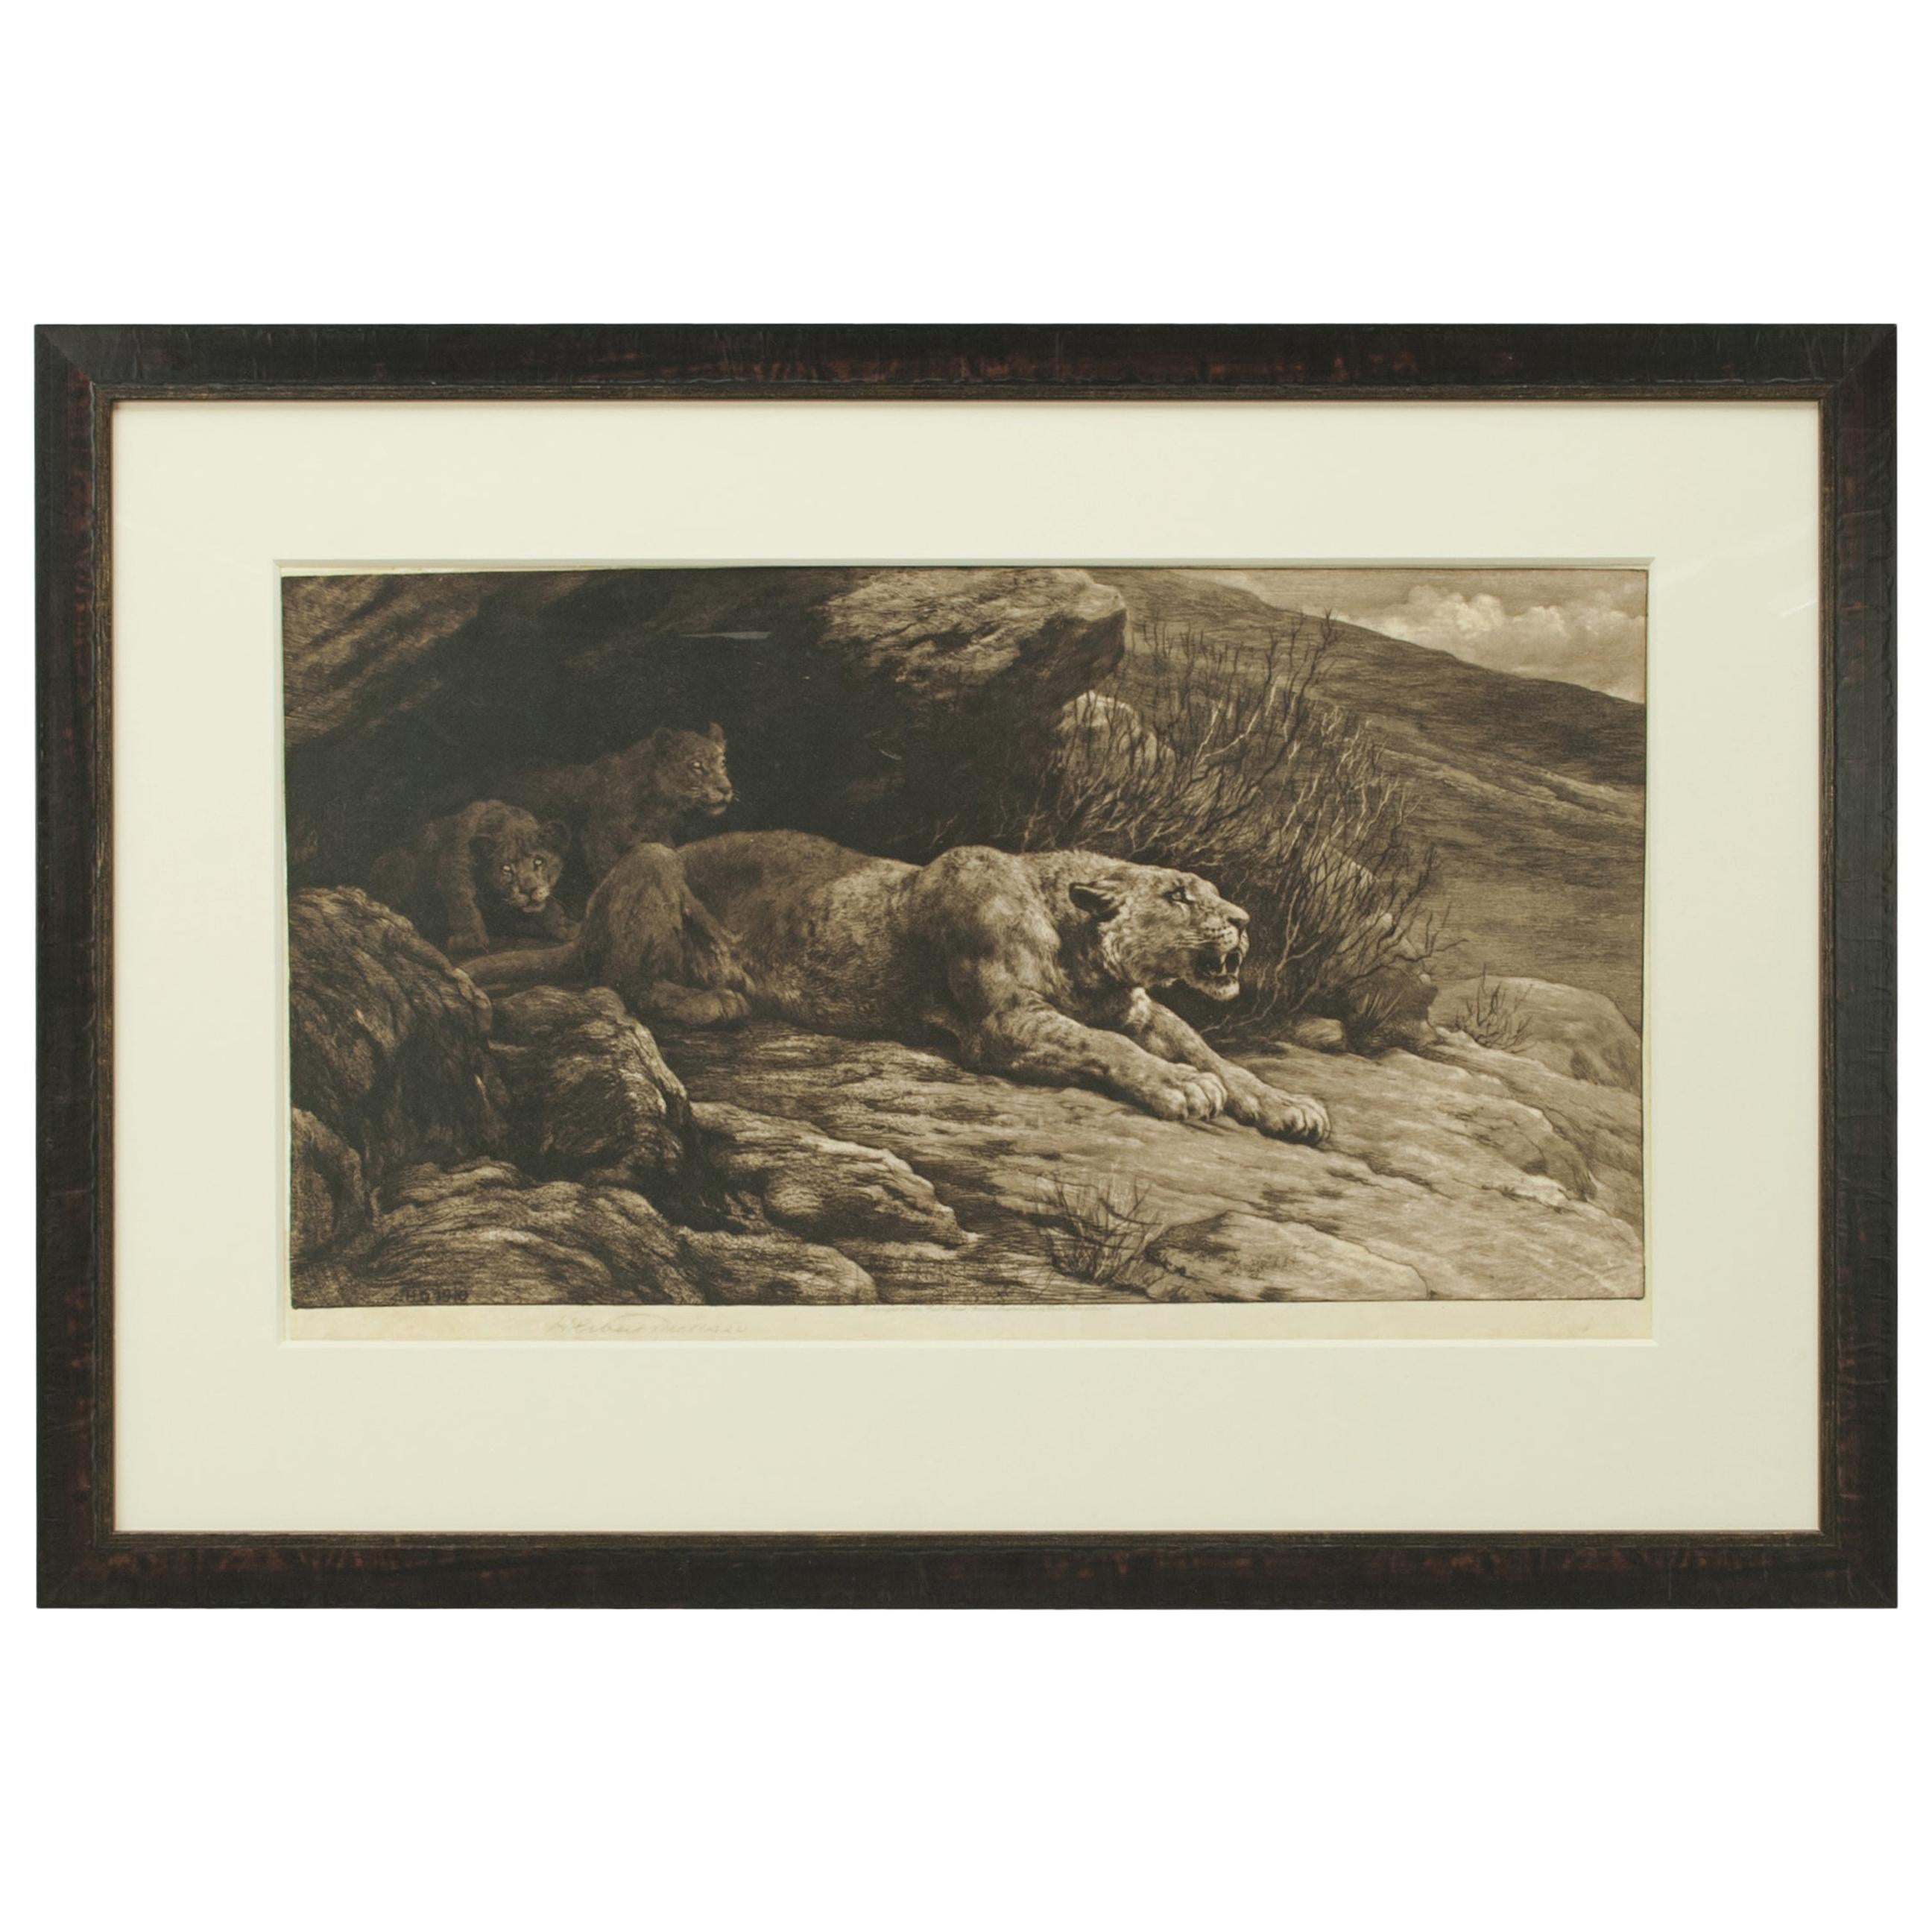 Mountain Lion and Cubs by Herbert Dicksee, Antique Etching